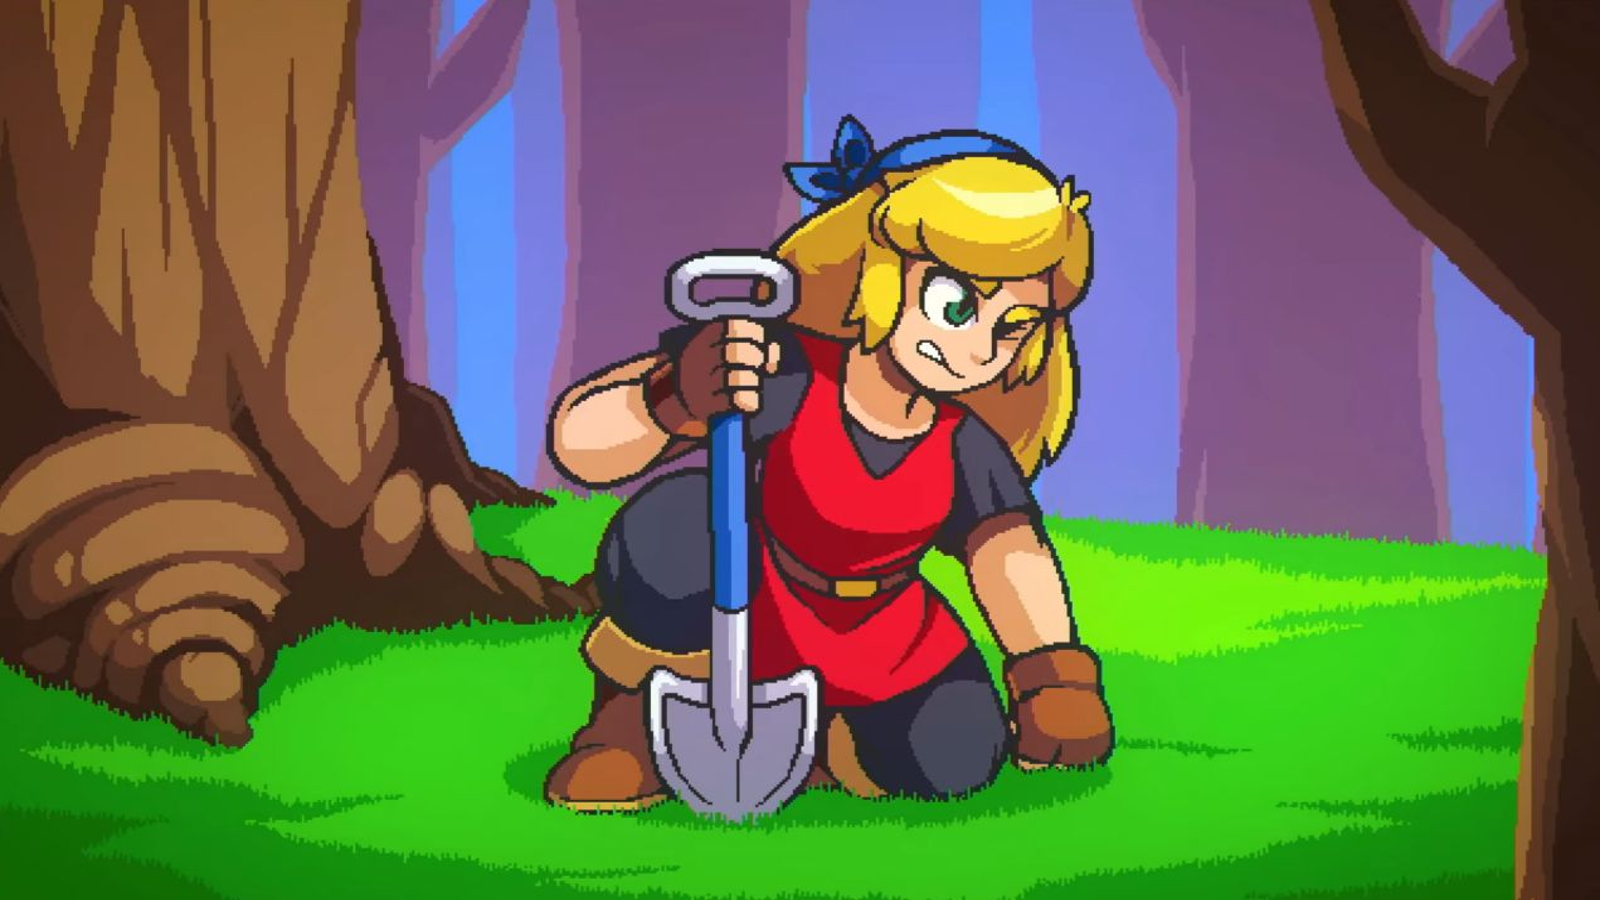 Cadence of Hyrule is a Zelda rhythm game that demands you move to